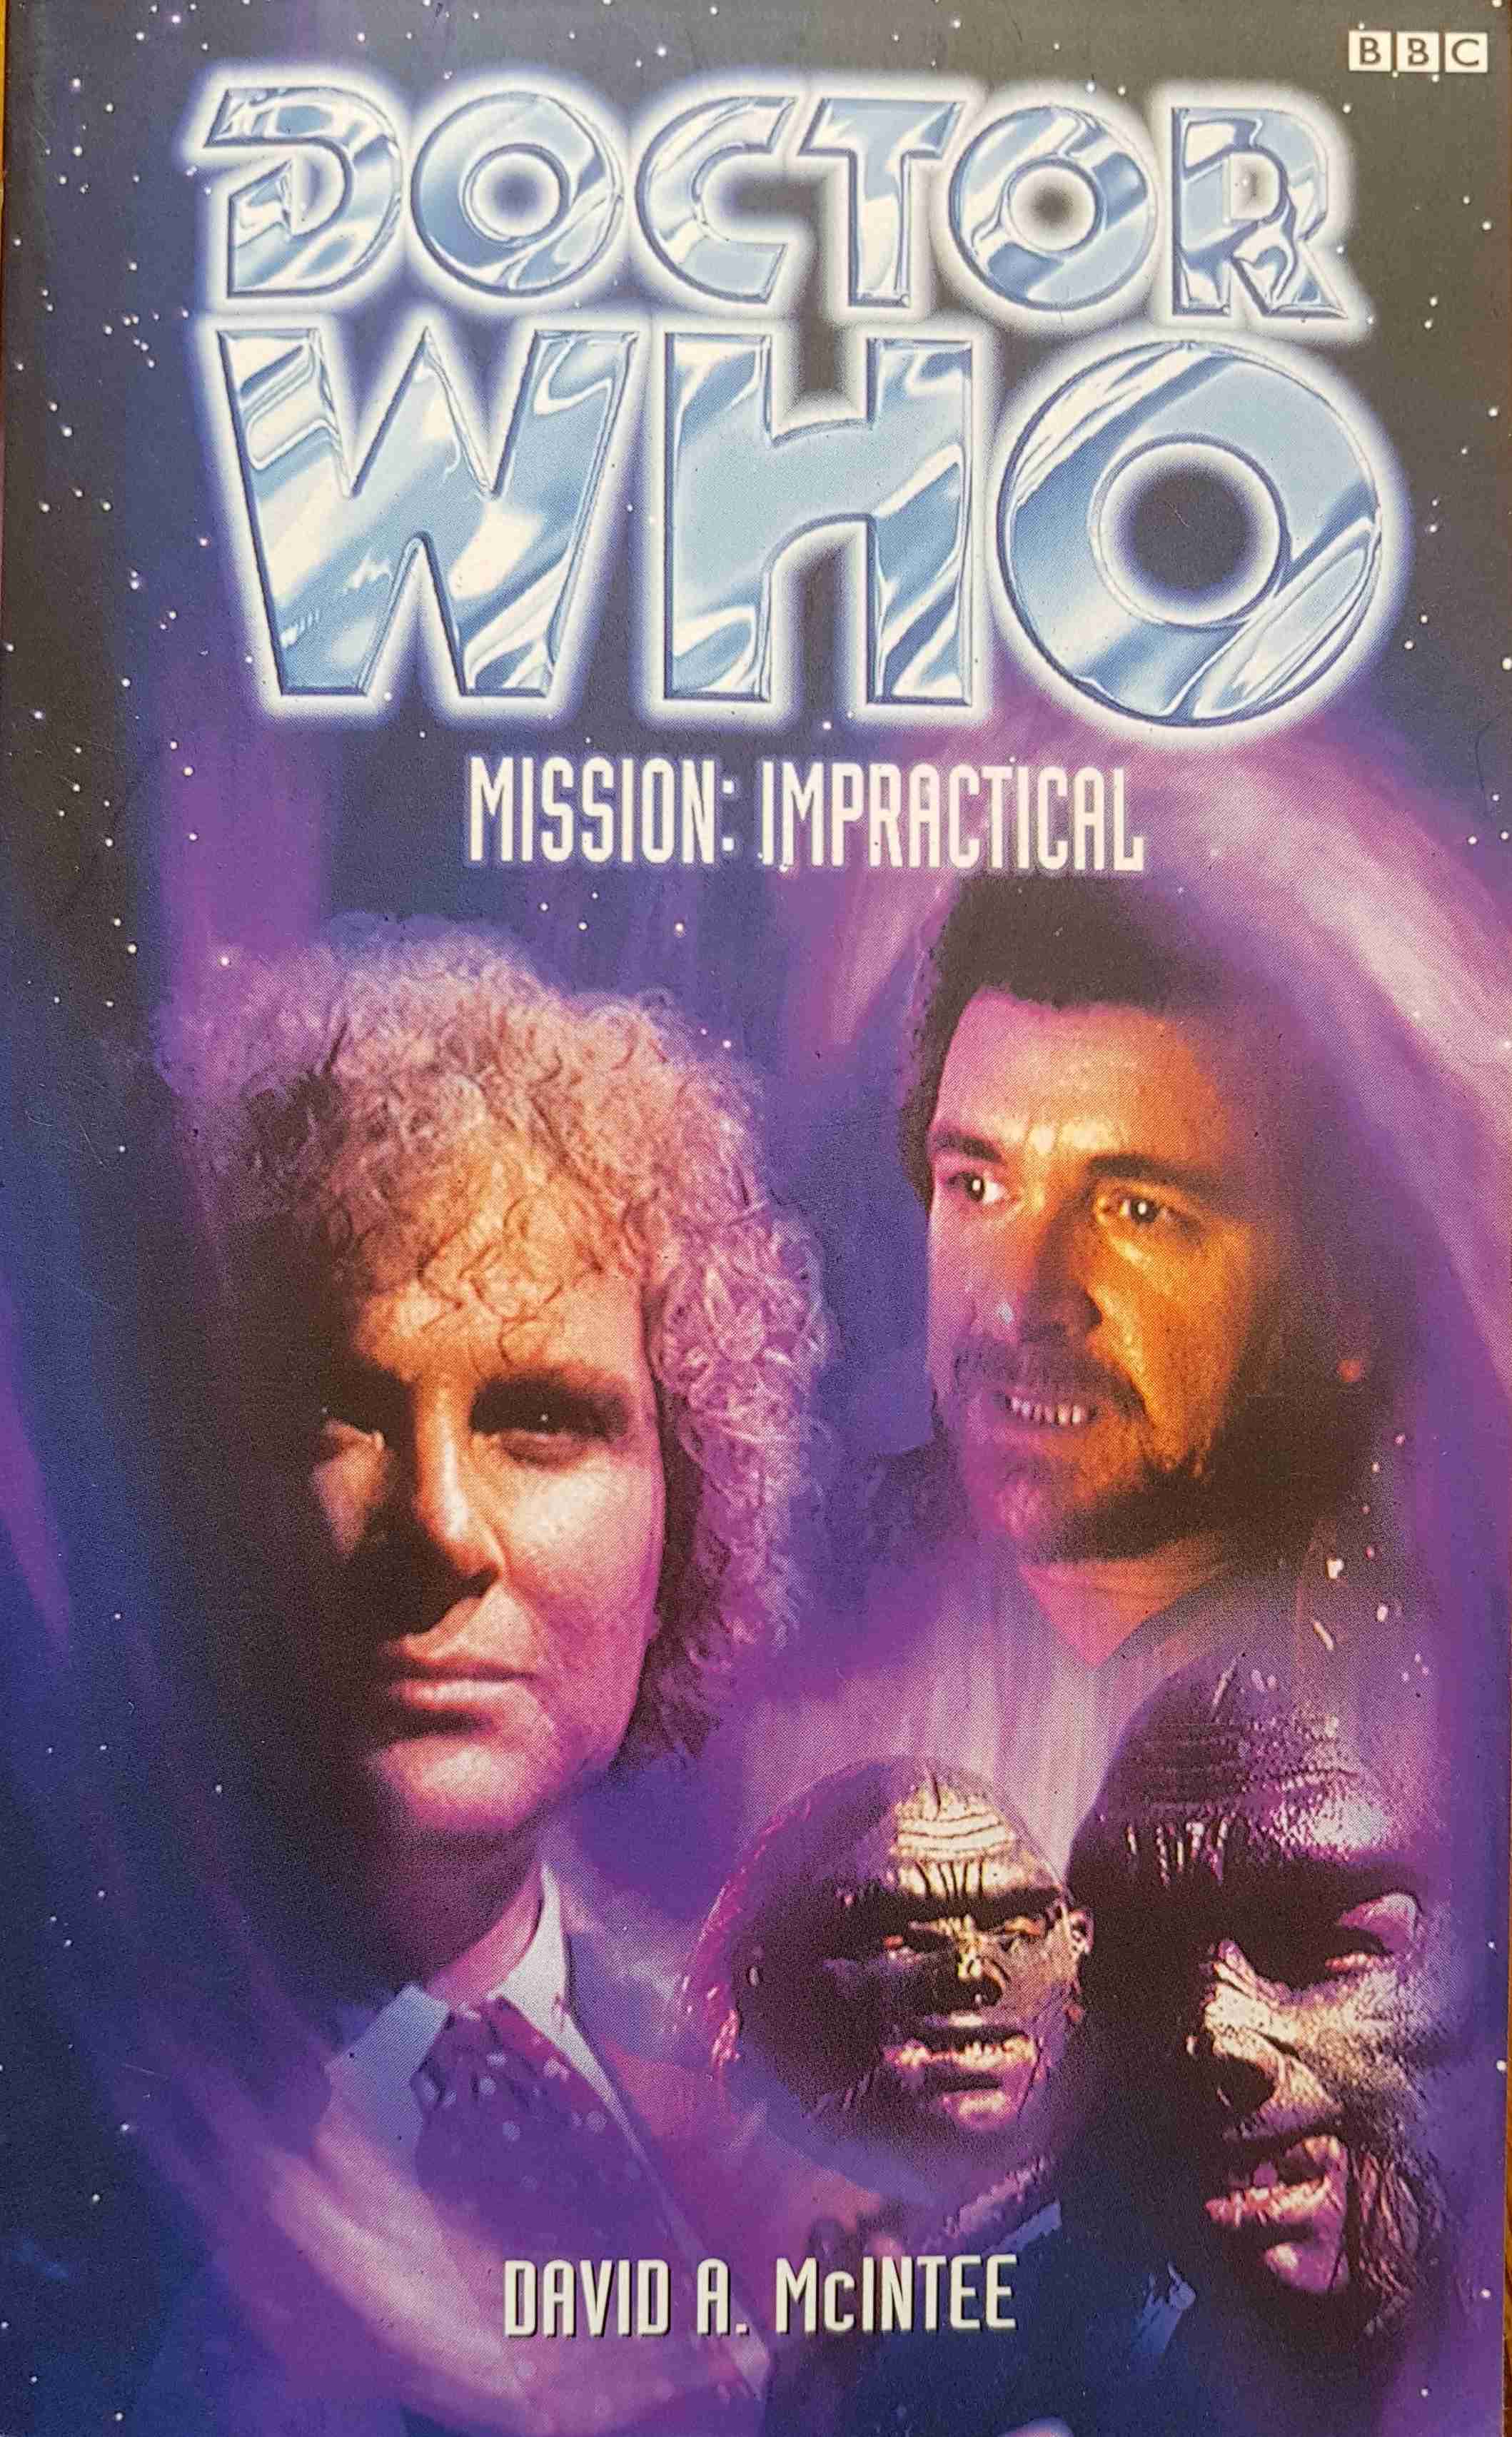 Picture of 0-563-40592-9 Doctor Who - Mission: Impractical (Autographed) by artist David A. McIntee from the BBC books - Records and Tapes library